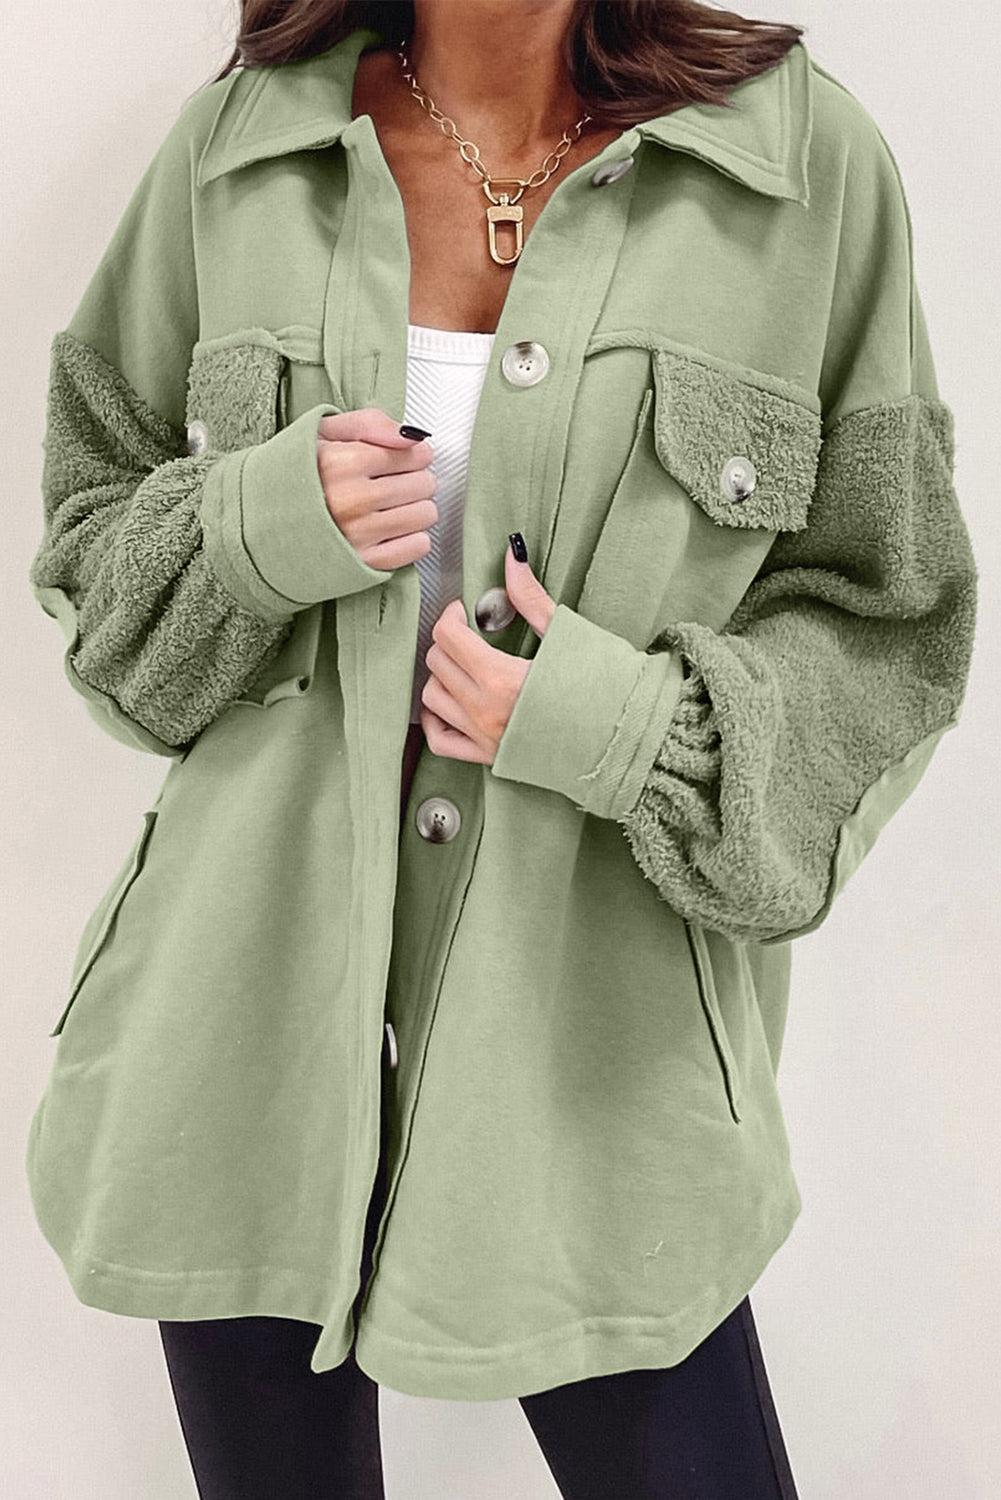 Green 50%Polyester+50%Cotton Exposed Seam Elbow Patch Oversized Shacket in Peach Blossom, Sage, or Chestnut - women's shacket at TFC&H Co.